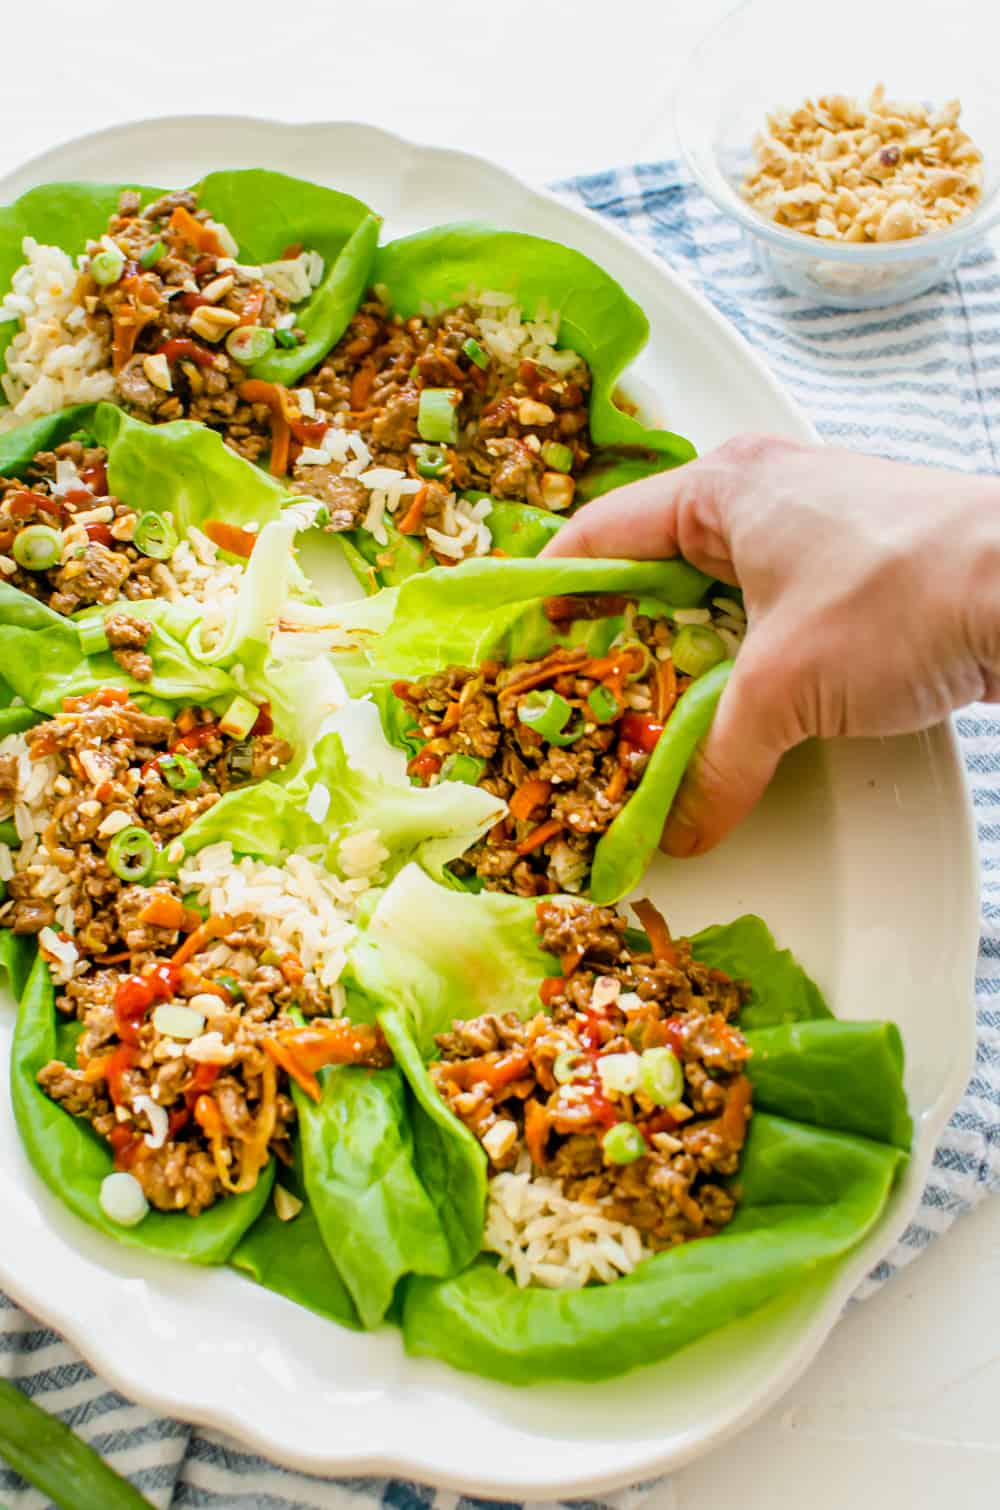 Chicken lettuce wraps on a platter with a hand grabbing one.